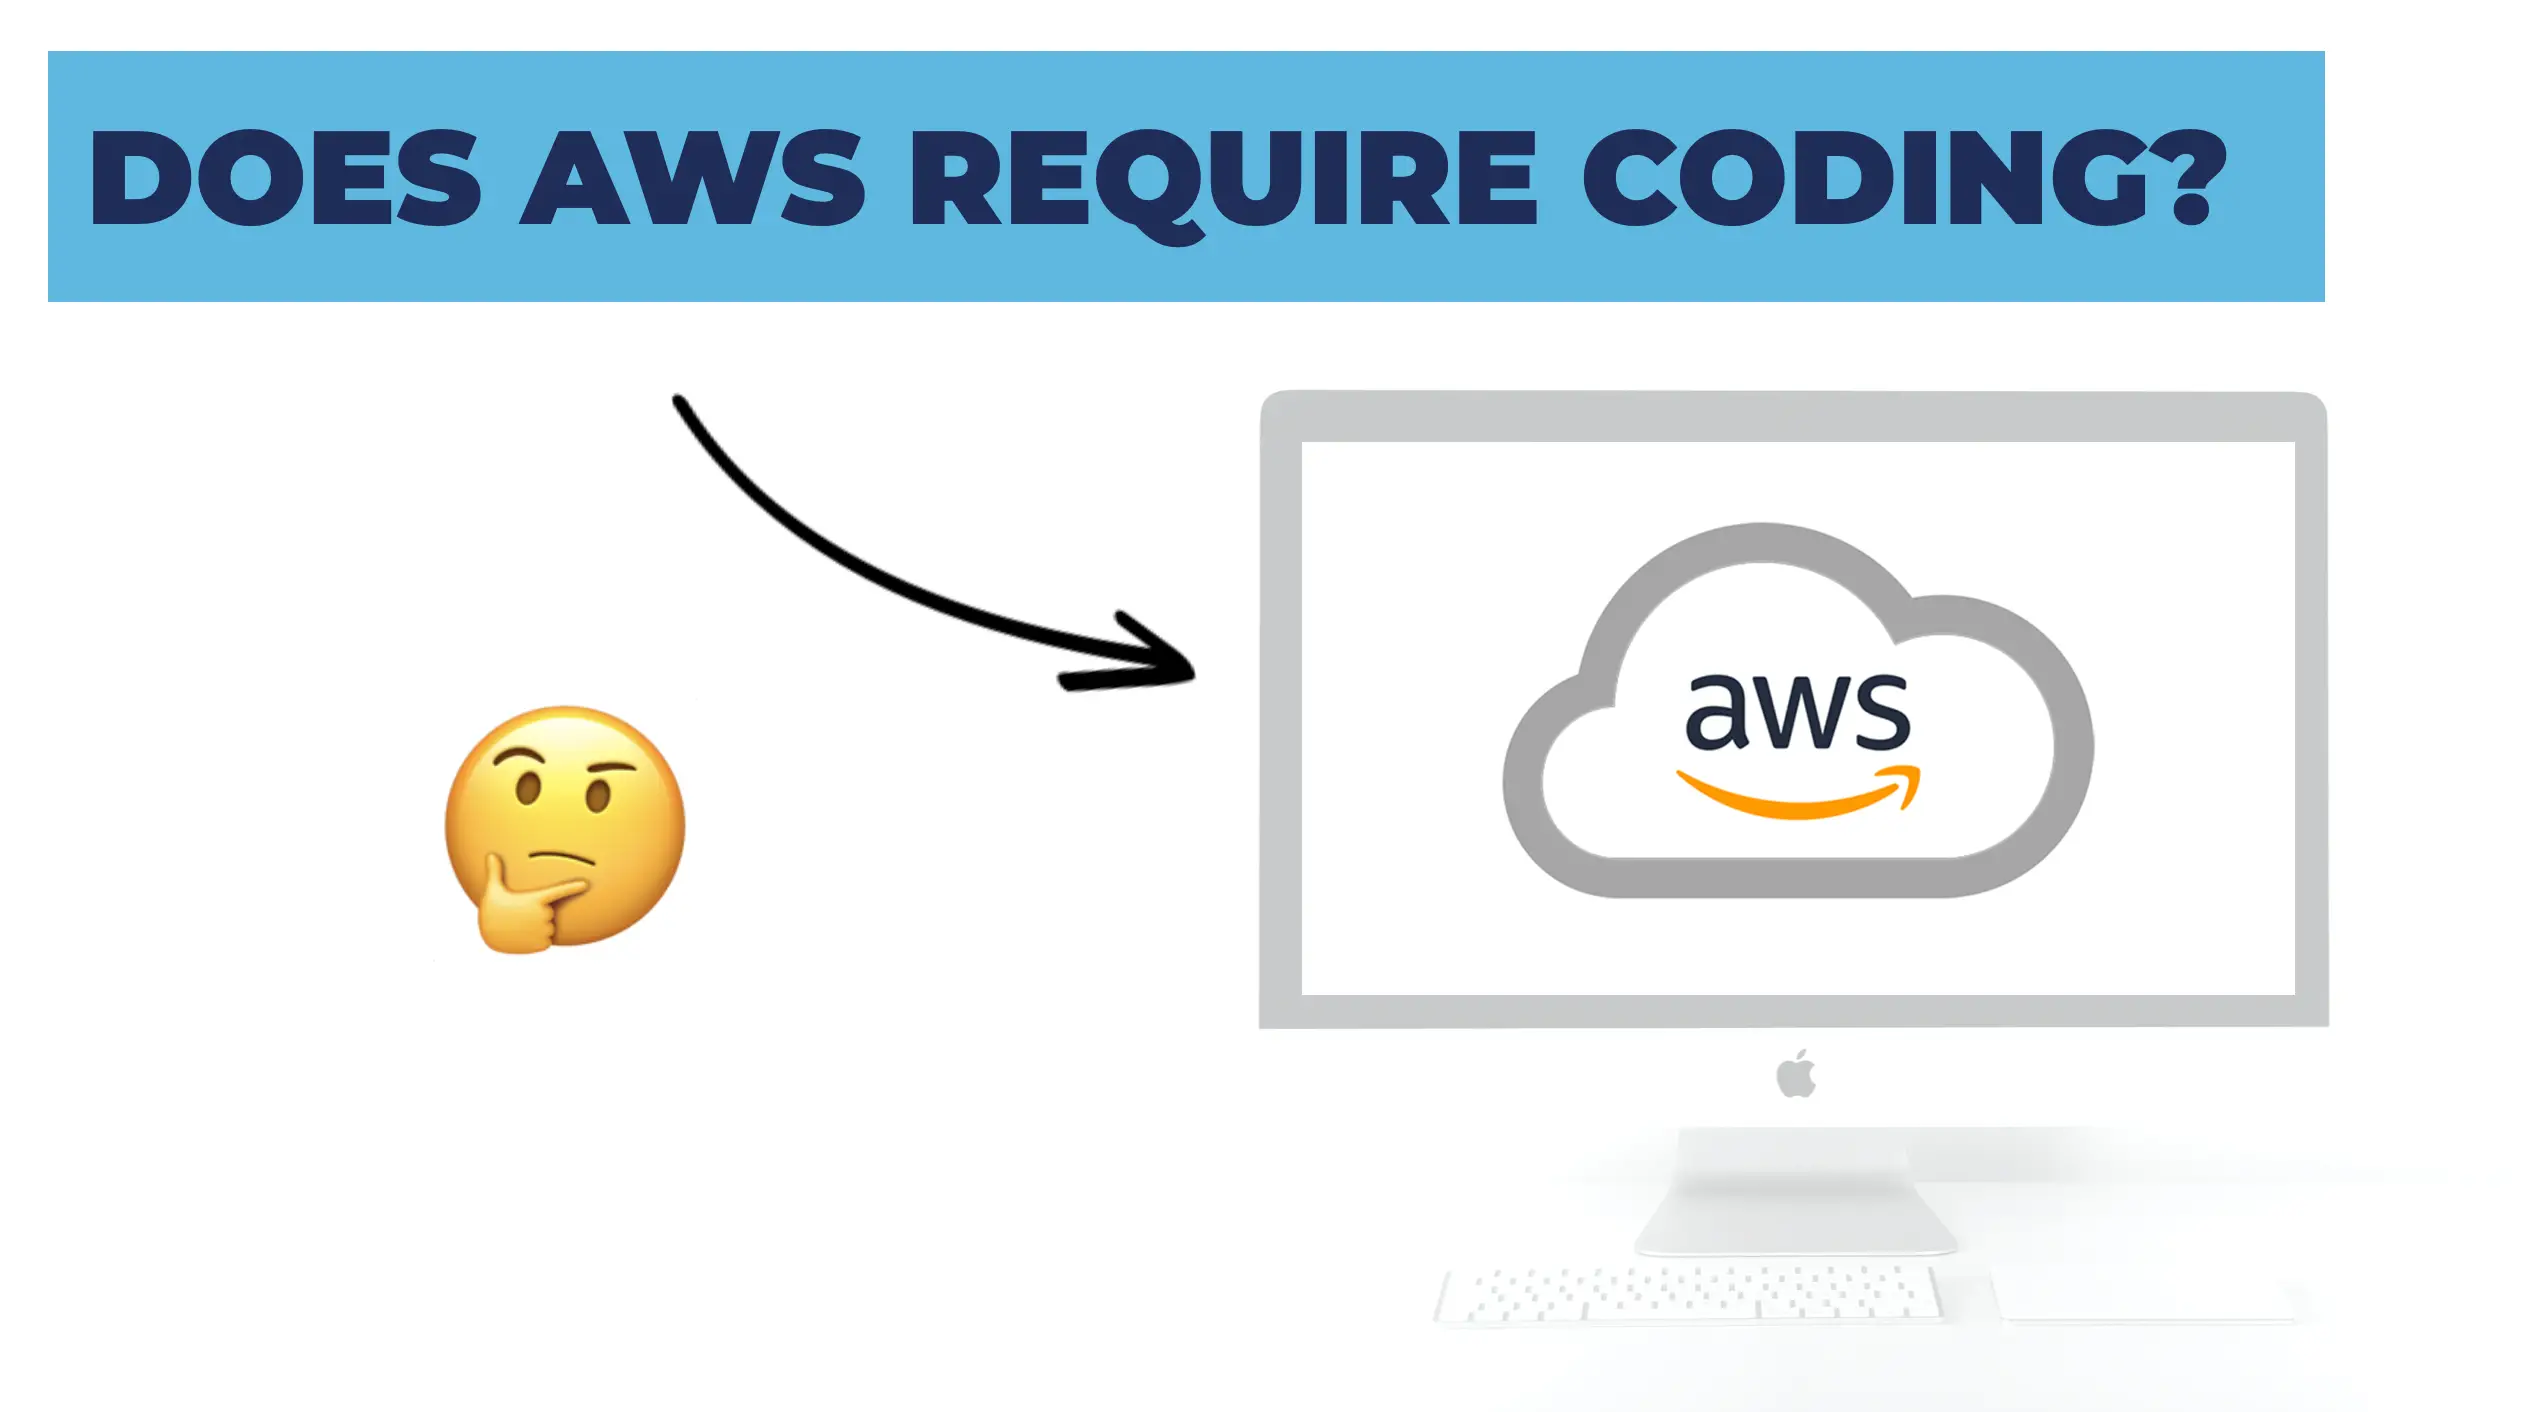 Does AWS require coding?